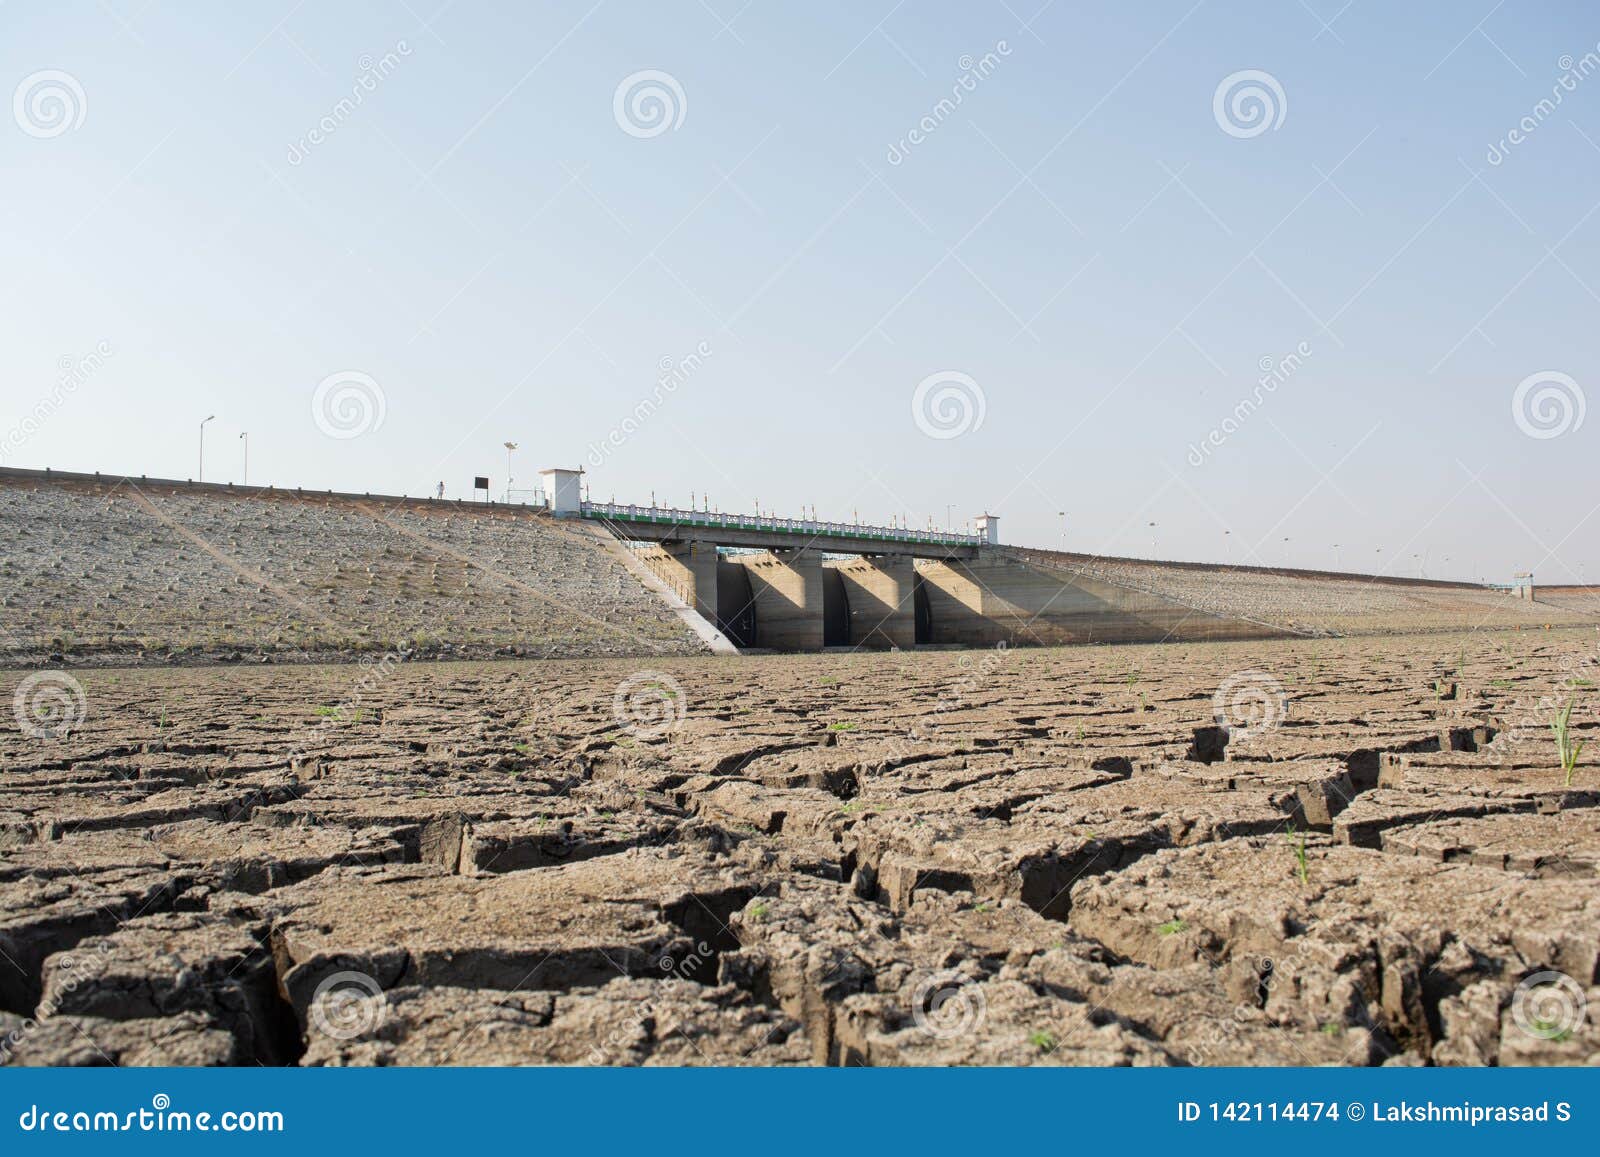 a dried up empty reservoir or dam during a summer heatwave, low rainfall and drought in north karnataka,india